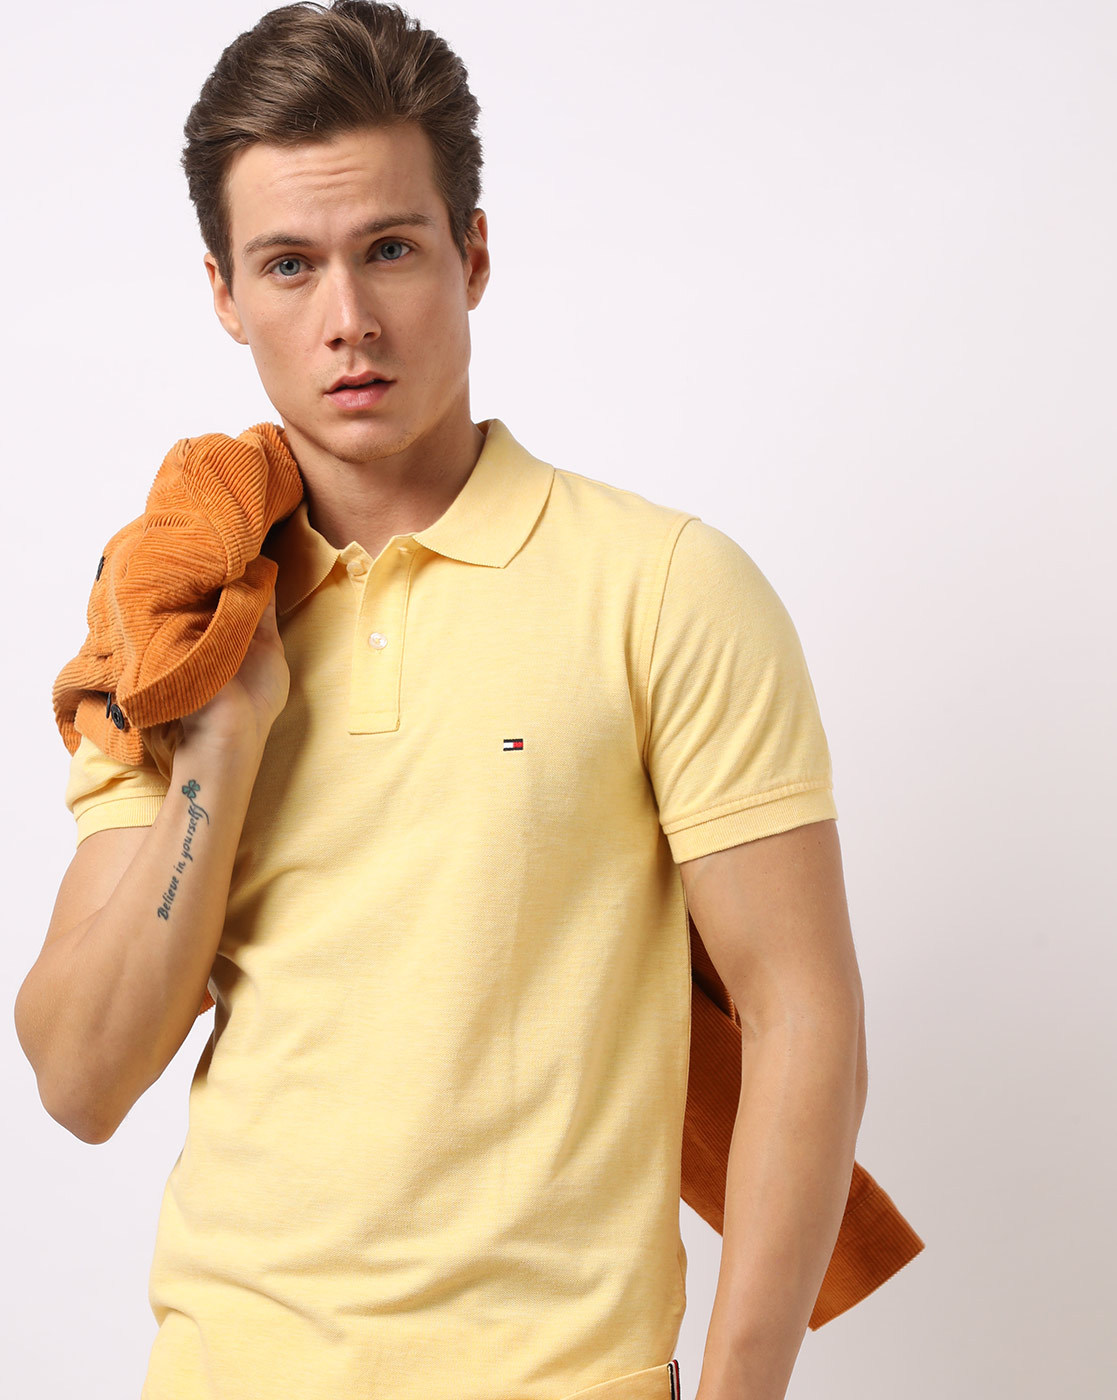 tommy hilfiger yellow polo t shirt